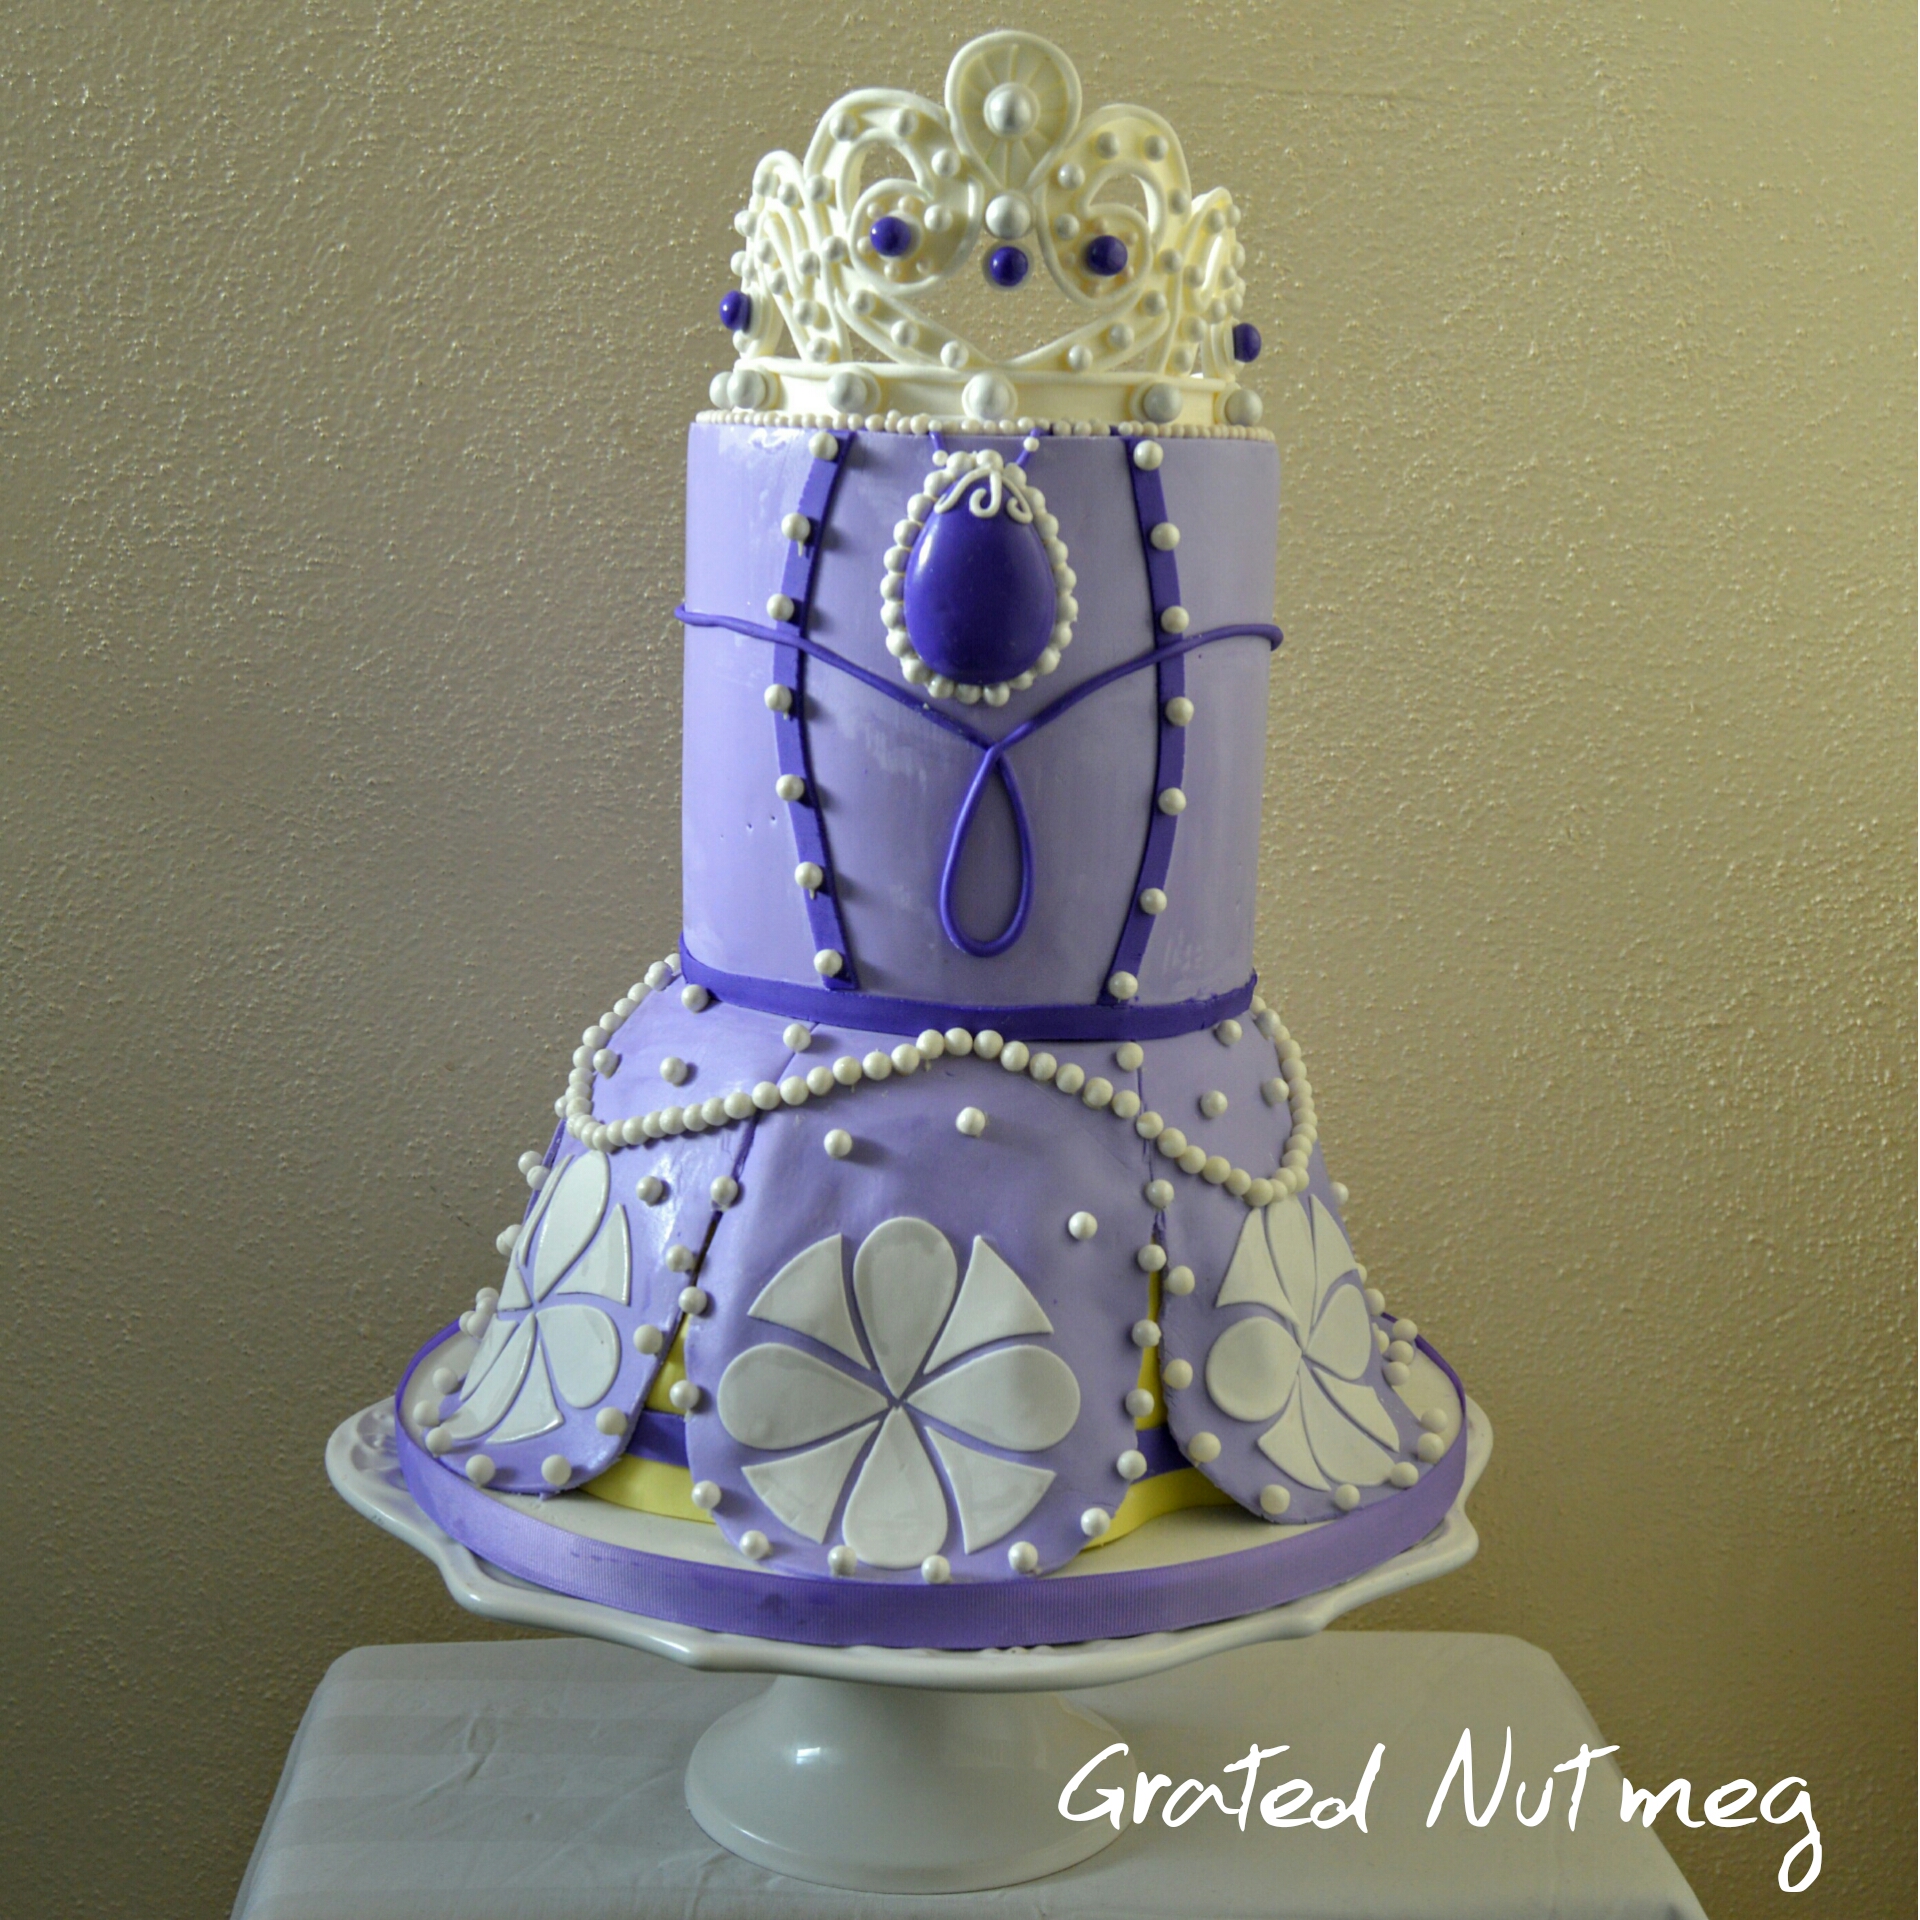 The Making of a Sofia the First Cake